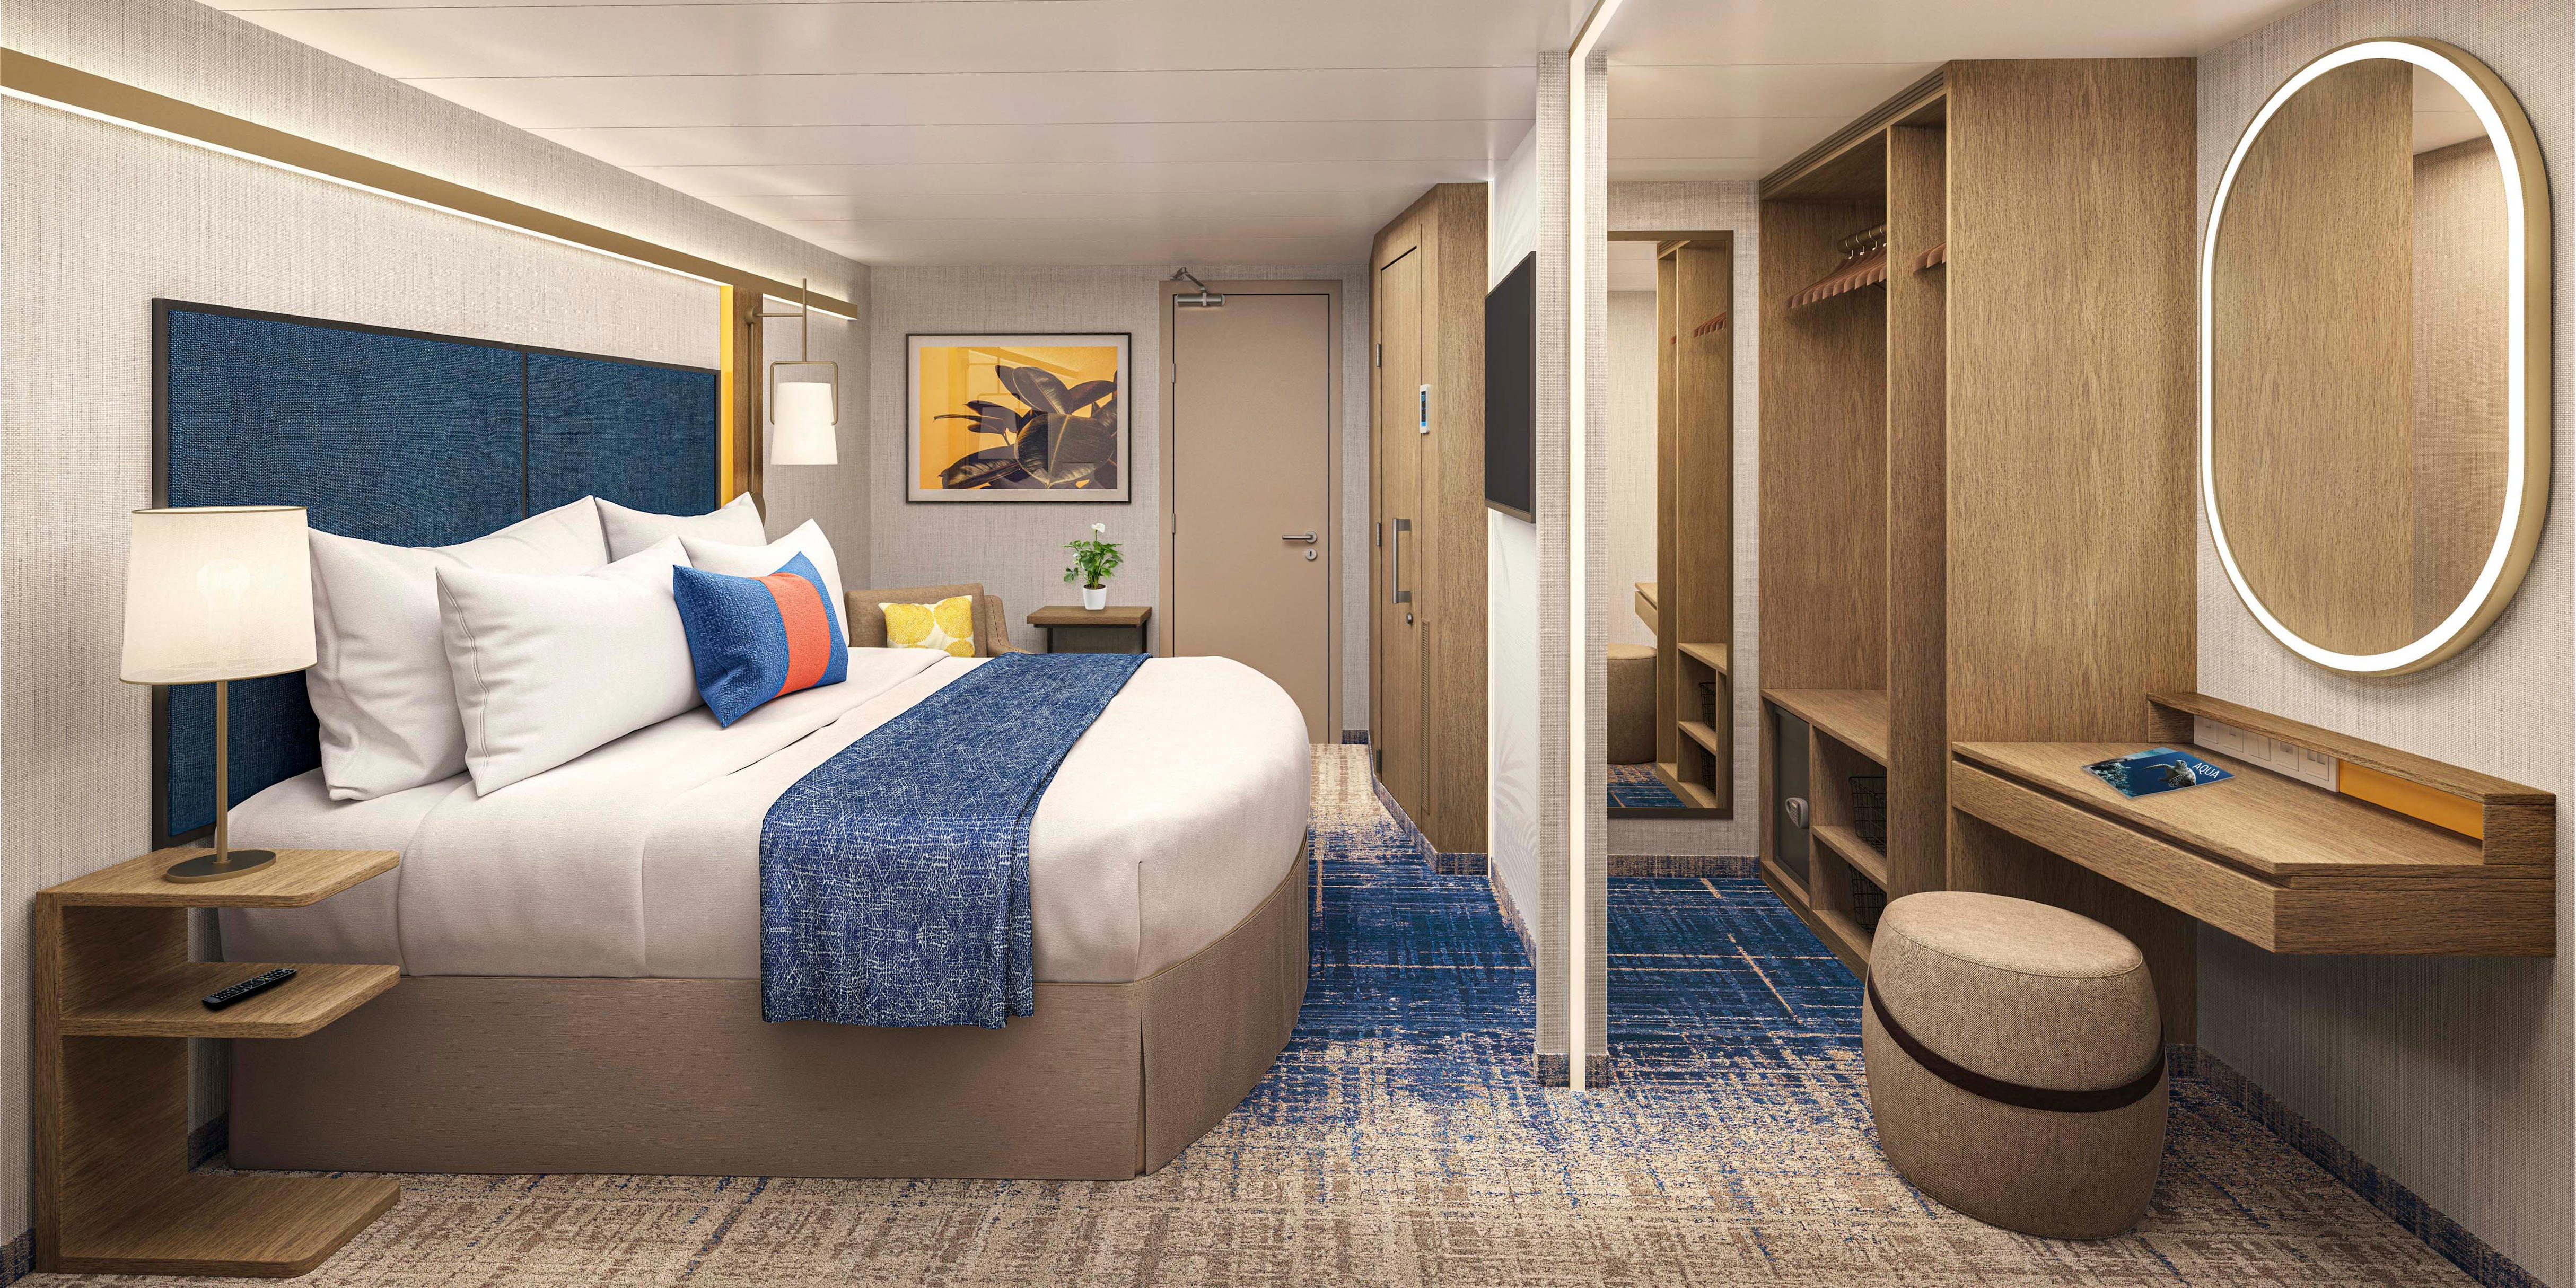 <p>But even the windowless <a href="https://www.businessinsider.com/royal-caribbean-icon-of-the-seas-most-expensive-cabin-photo-2024-1">cabin</a> comes with its own list of upgrades.</p><p>Travelers who want to pick their own stateroom must pay an additional $128 per person. If they opt for one of the larger (by at least one square foot) interior cabins, it'll be an extra $100.</p><p>Which is to say, good luck avoiding any of the upcharged amenities on your <a href="https://www.businessinsider.com/things-about-royal-caribbean-icon-of-the-seas-2024-1">Icon of the Seas vacation</a>.</p>